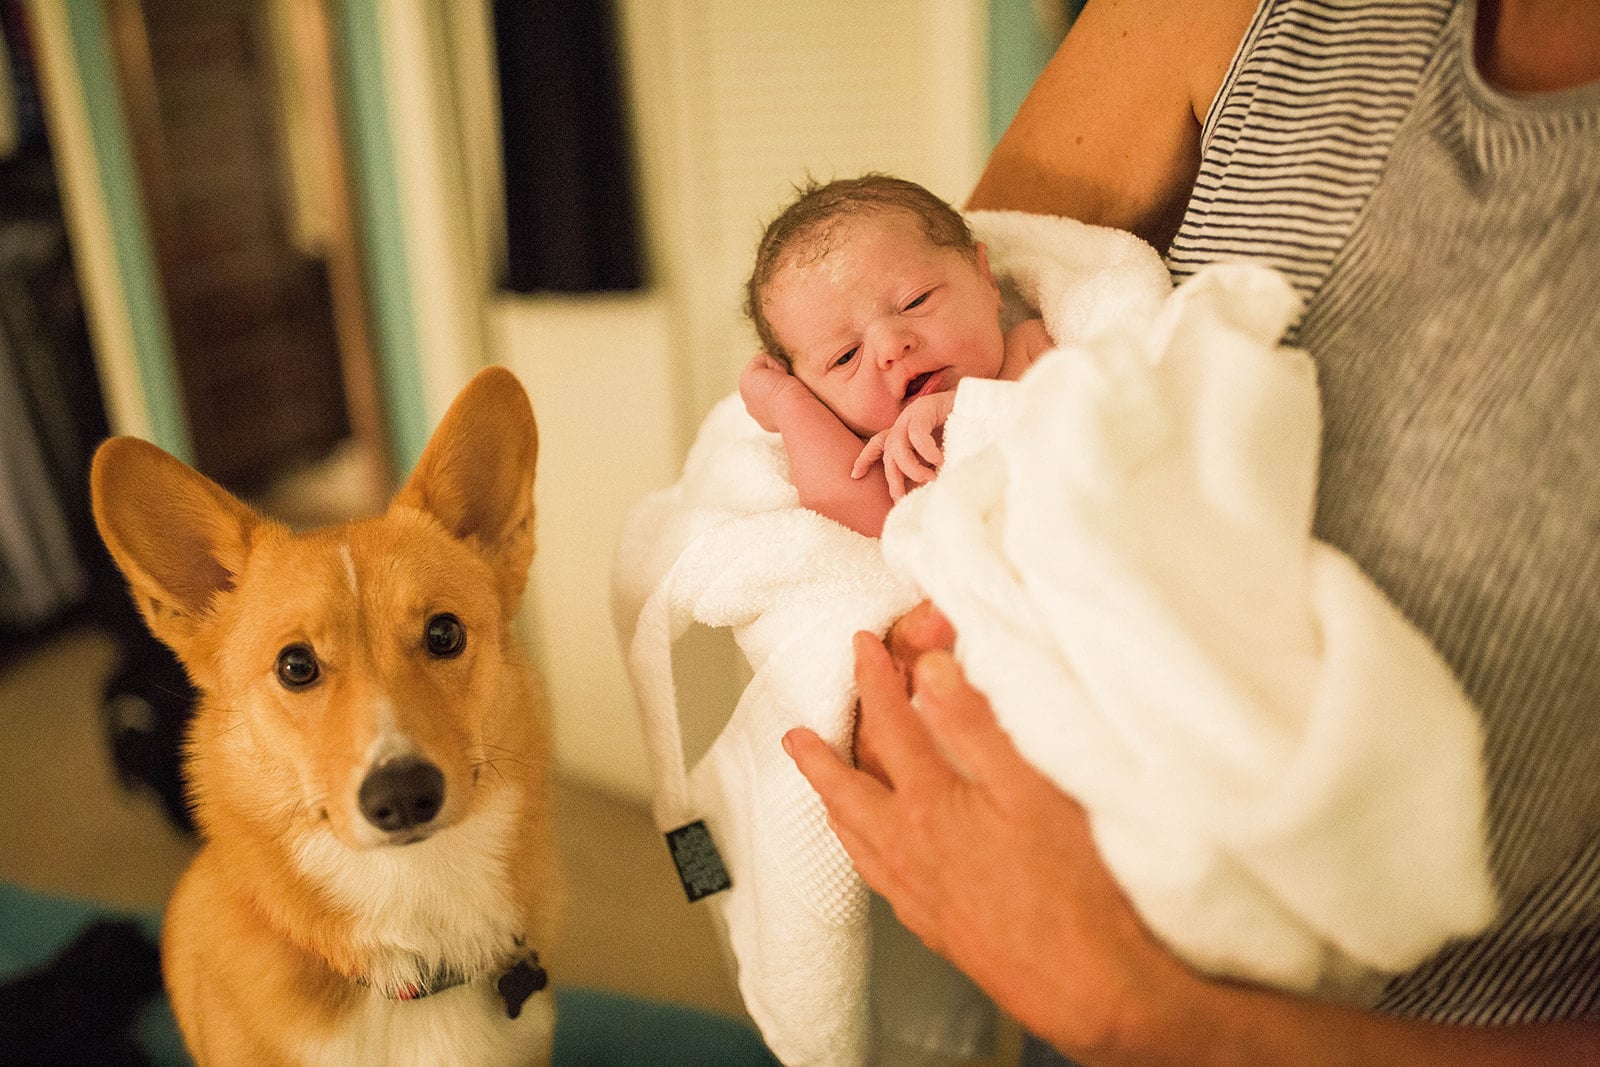 Dog Stays By Mom's Side While She Gives Birth